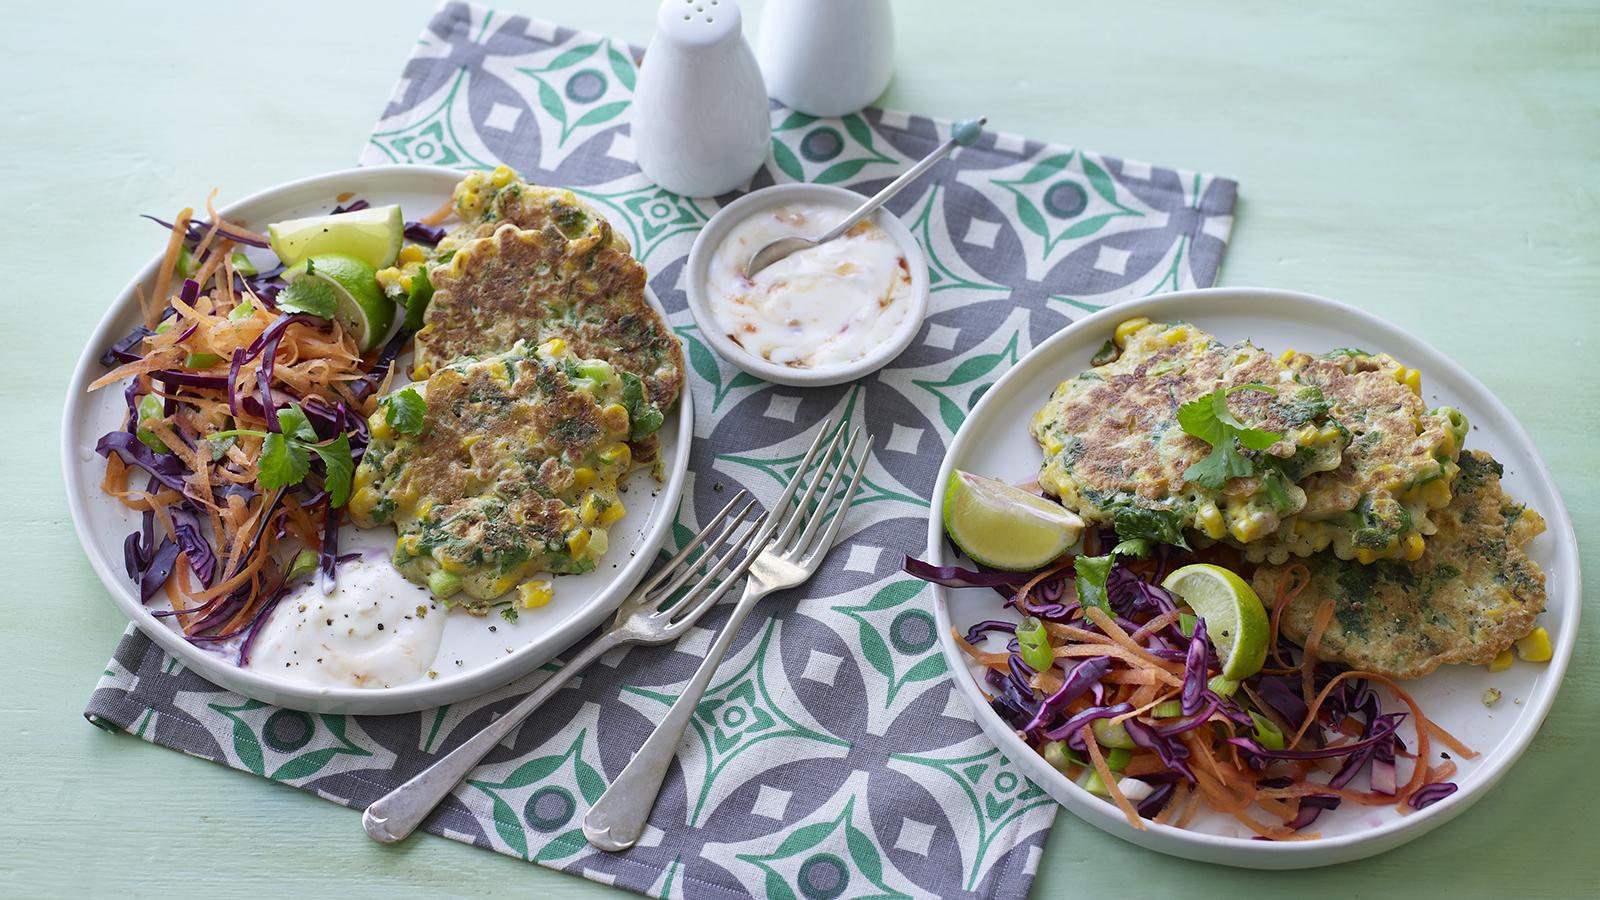 Sweetcorn fritters with sweet chilli dip recipe - BBC Food